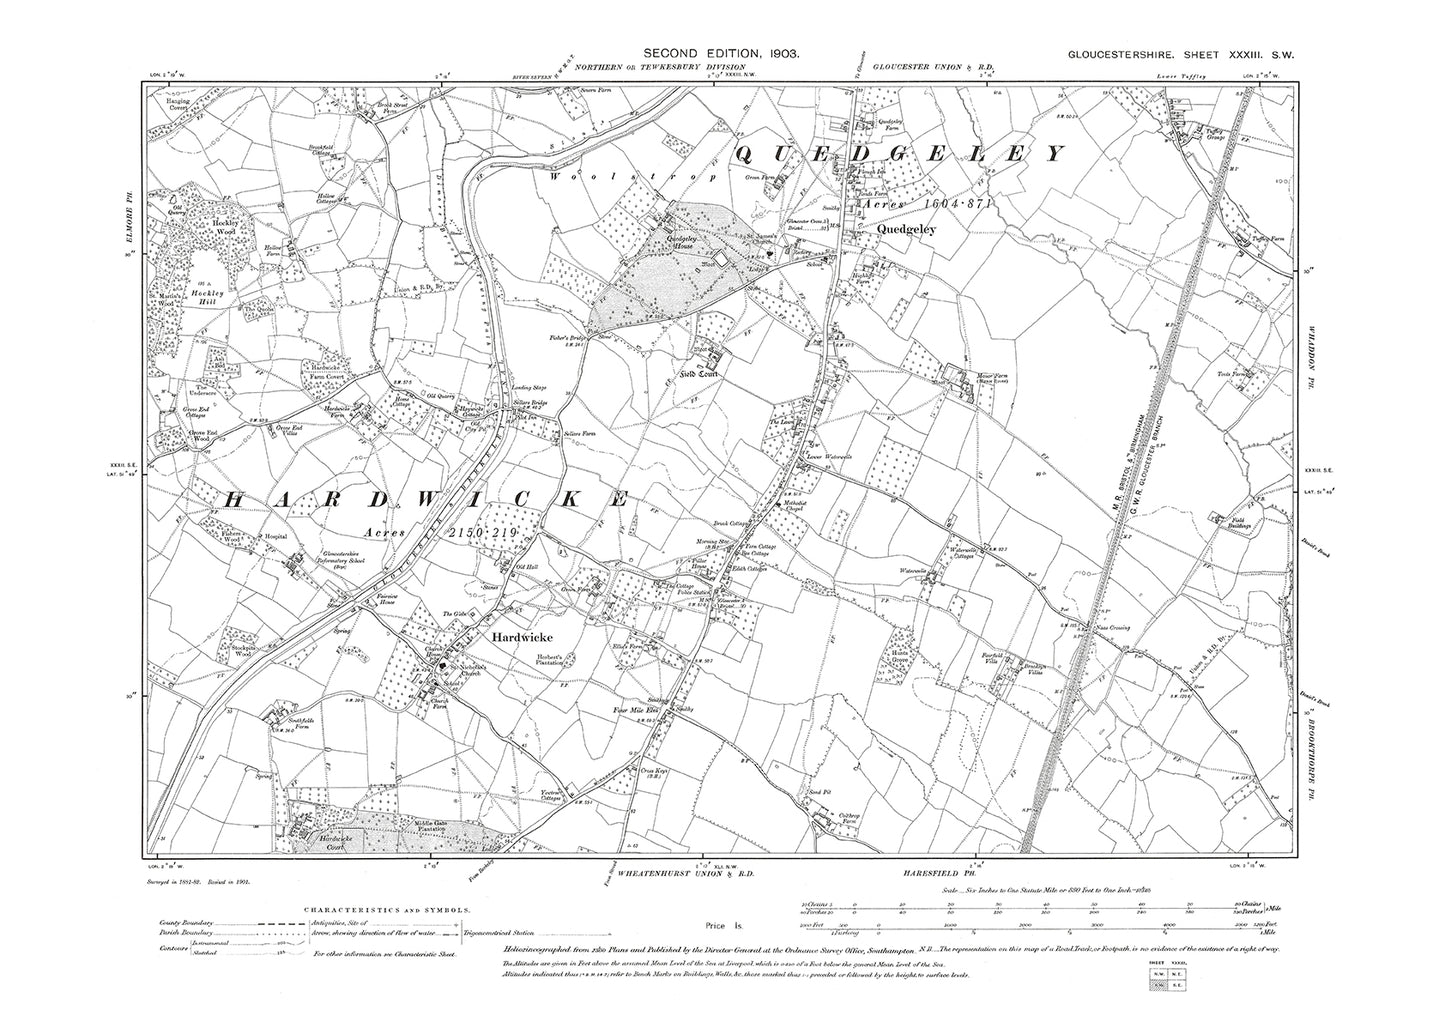 Old OS map dated 1903, showing Quedgeley, Hardwicke in Gloucestershire - 33SW